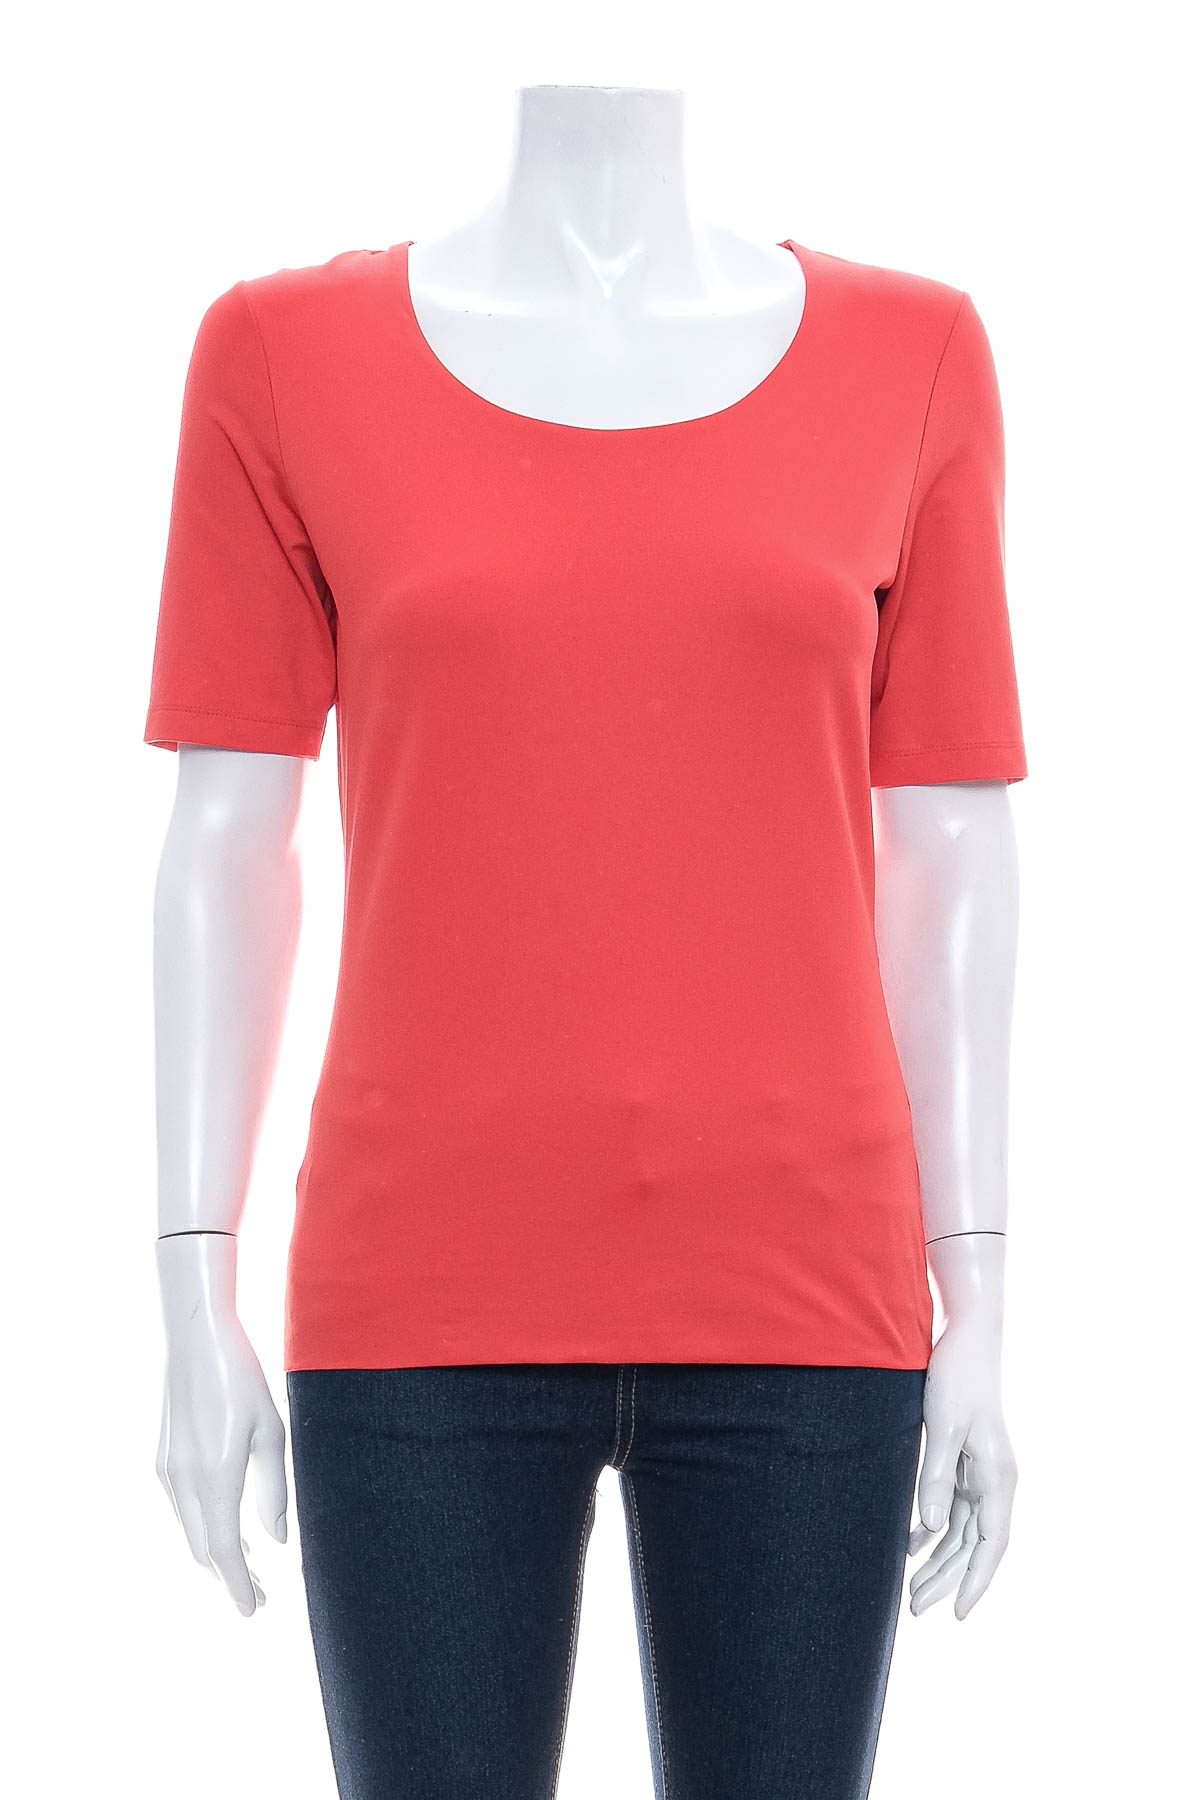 Women's t-shirt - SELECTION by S.Oliver - 0